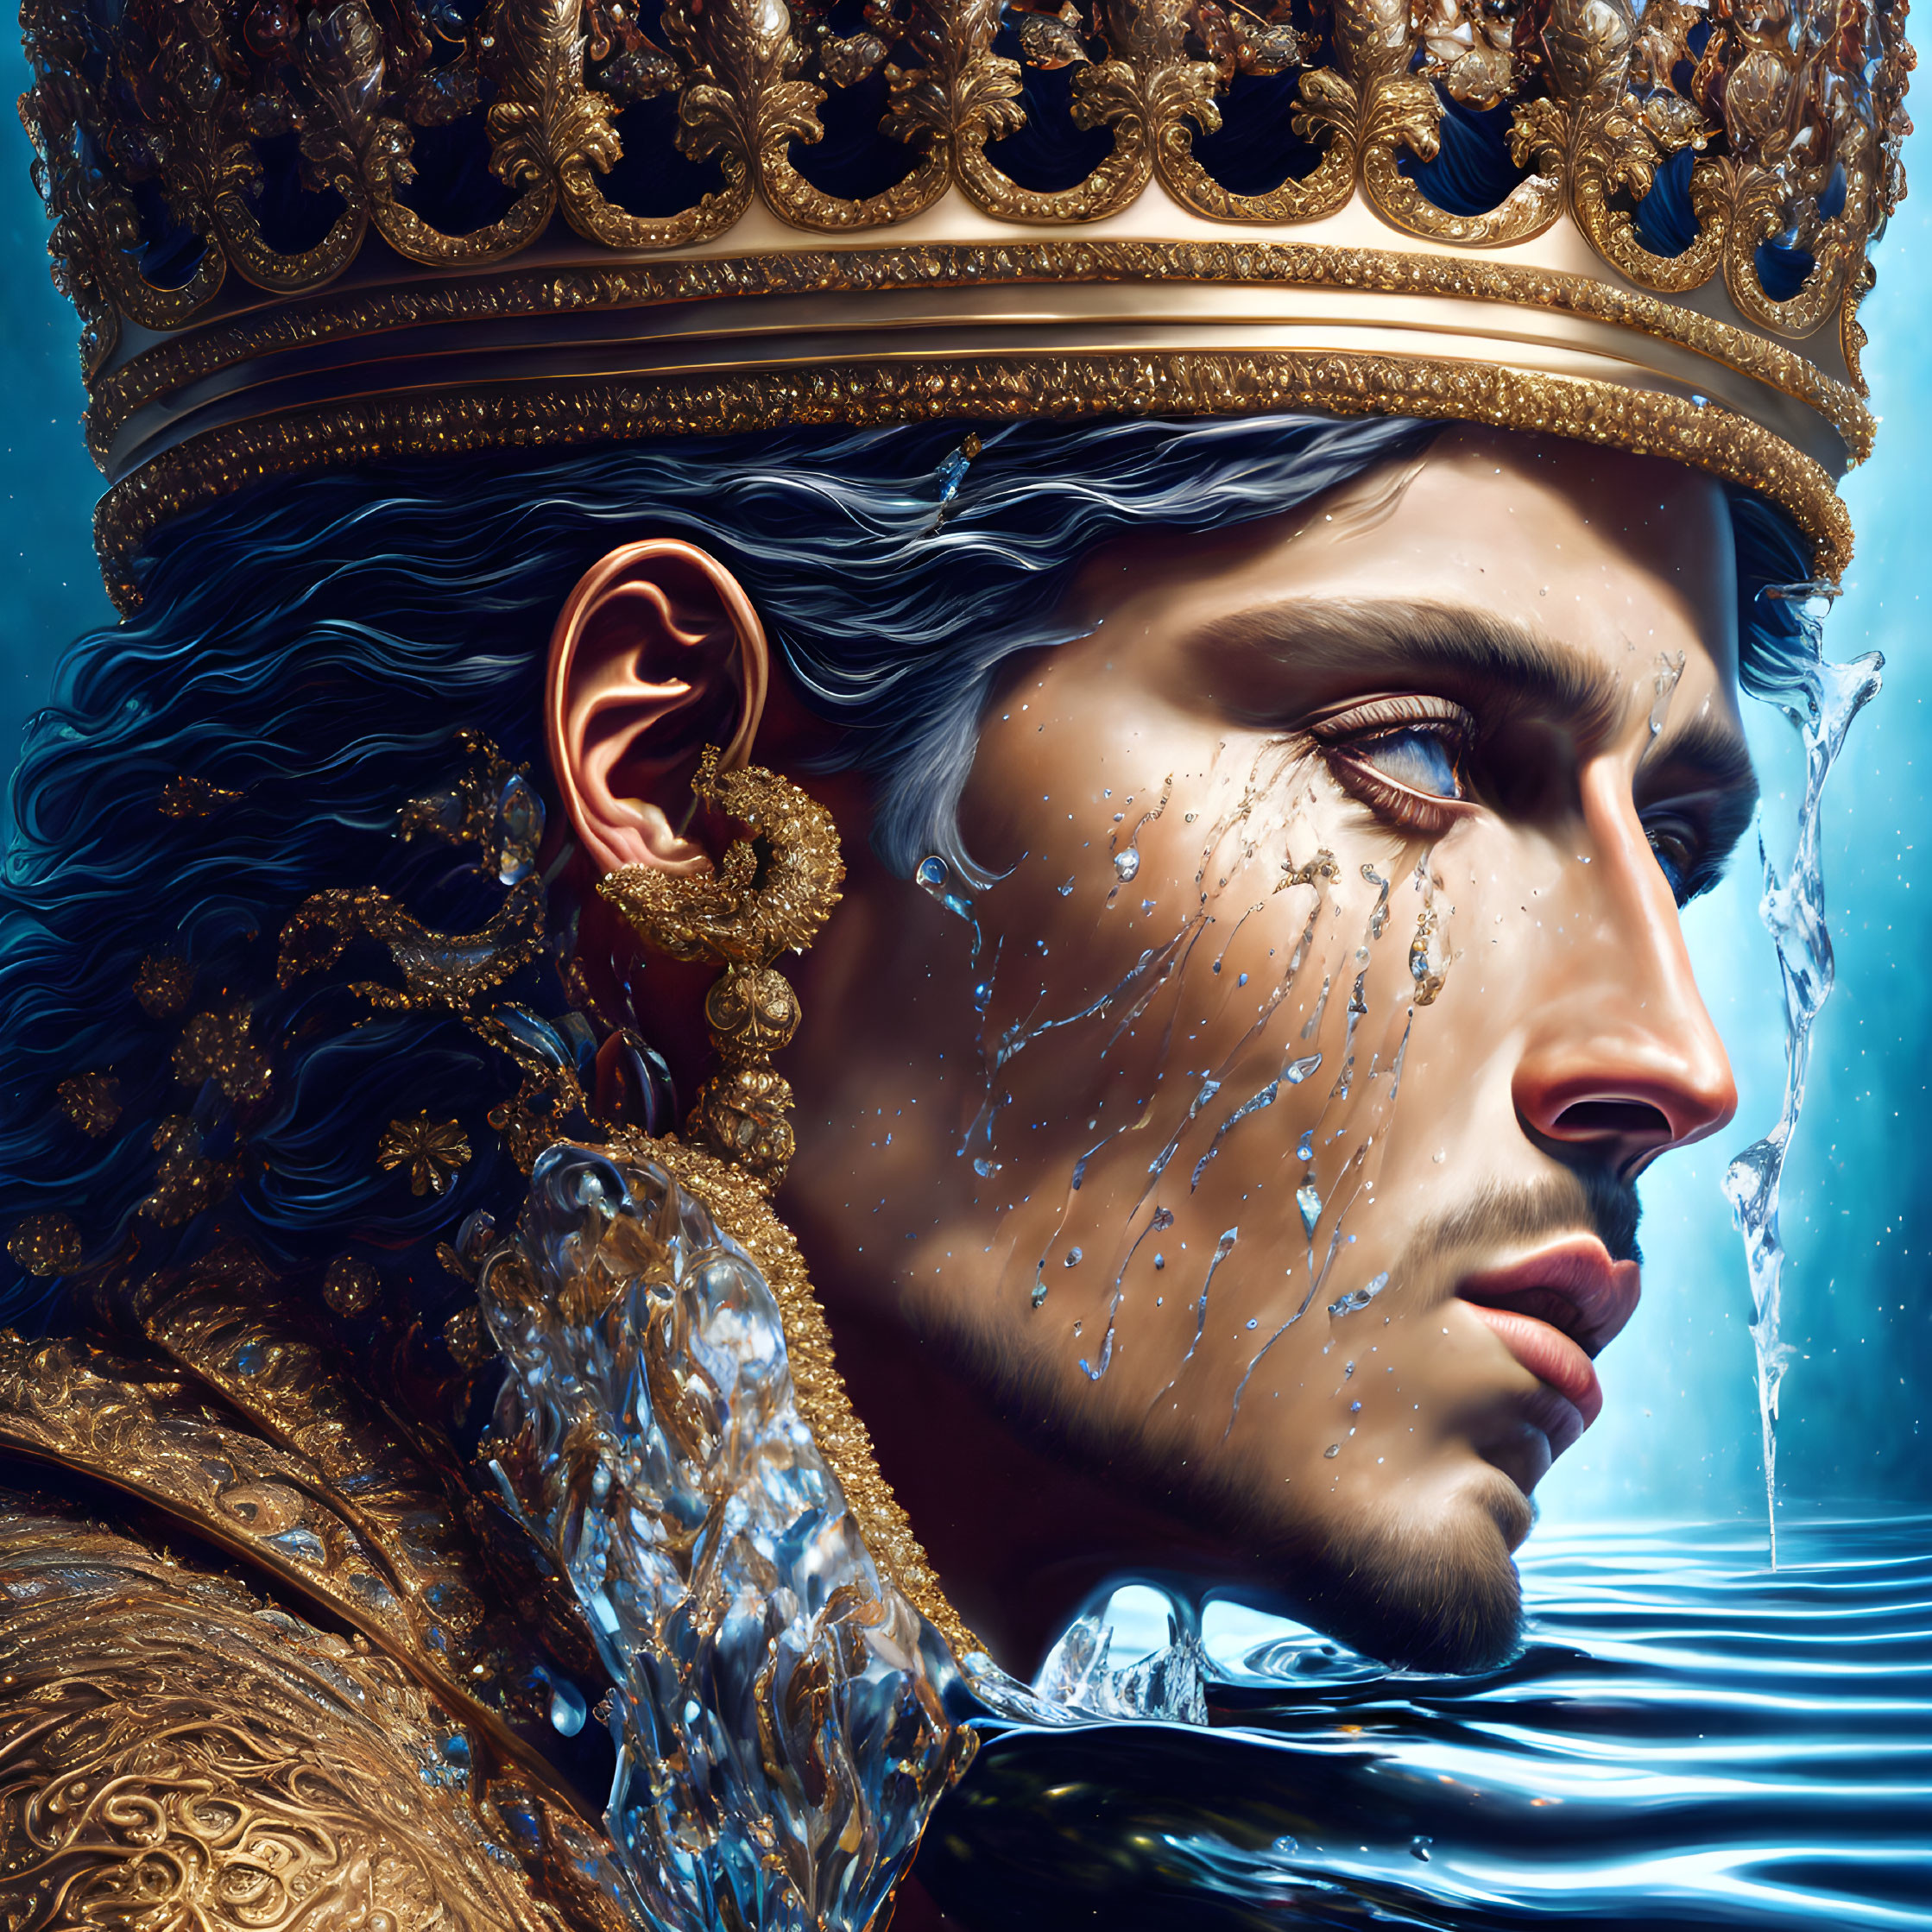 Detailed digital artwork of regal figure with golden crown and cascading water